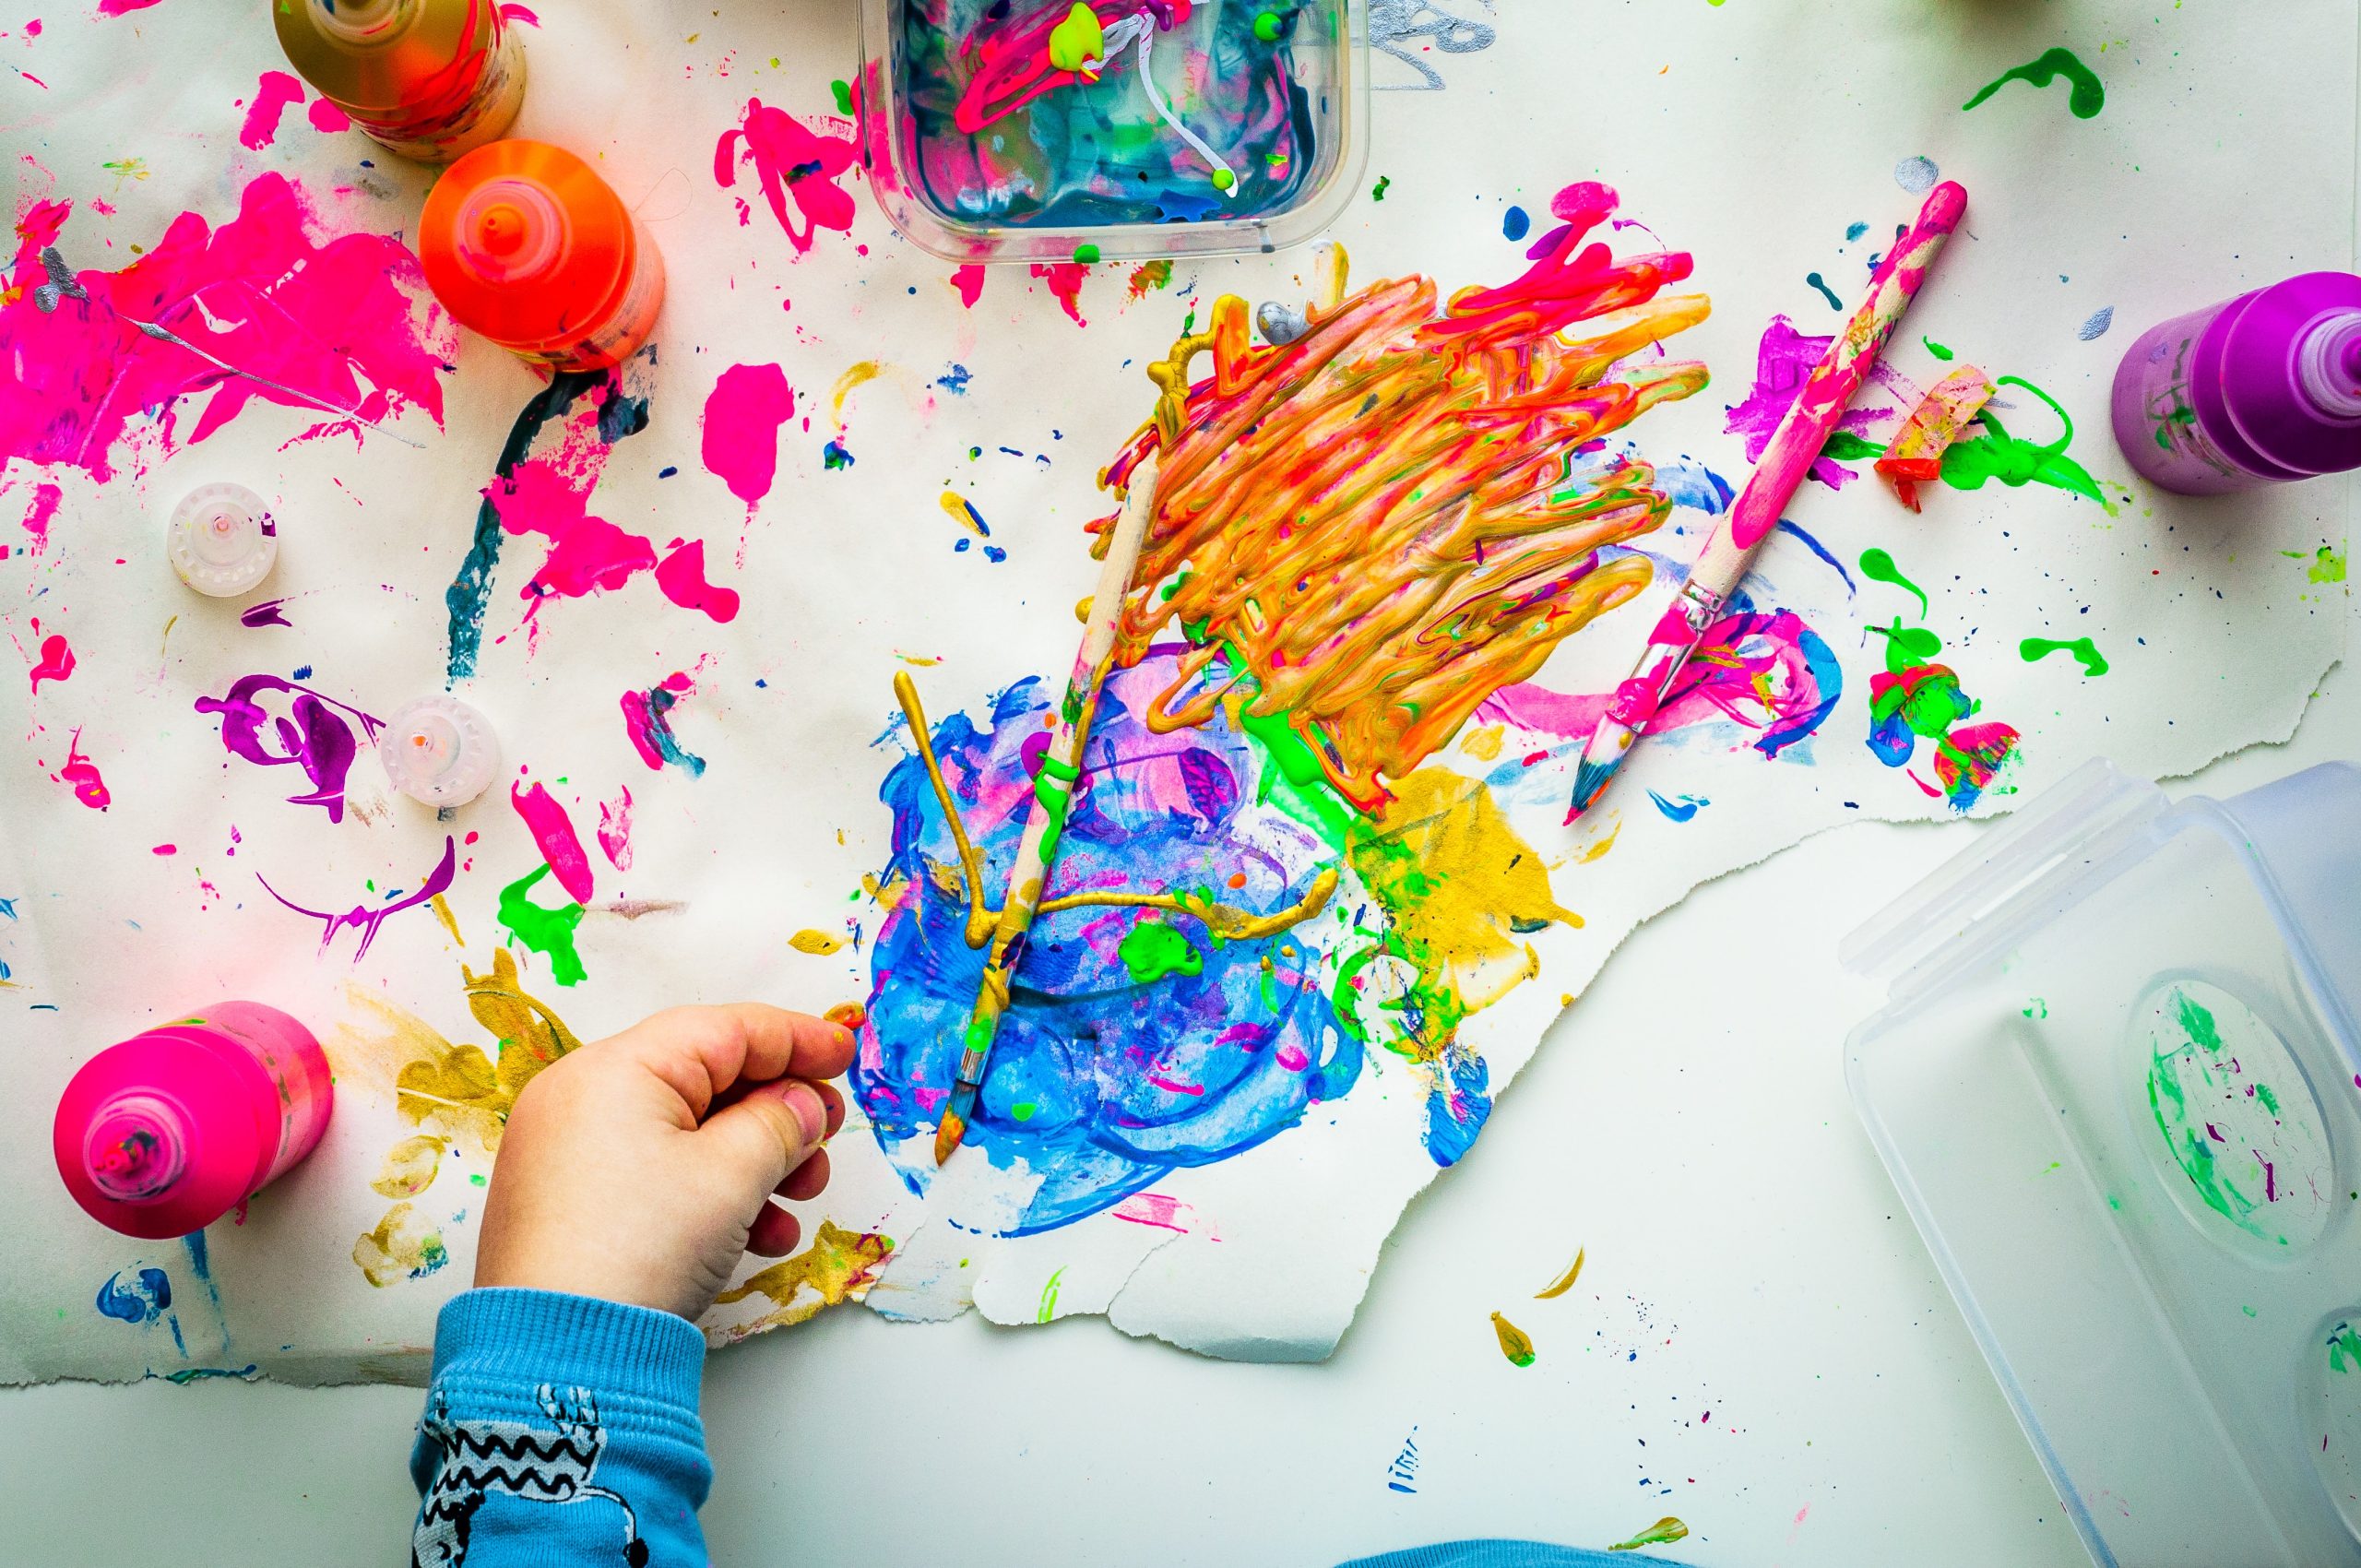 In an article about creativity, a photo of a child finger painting.